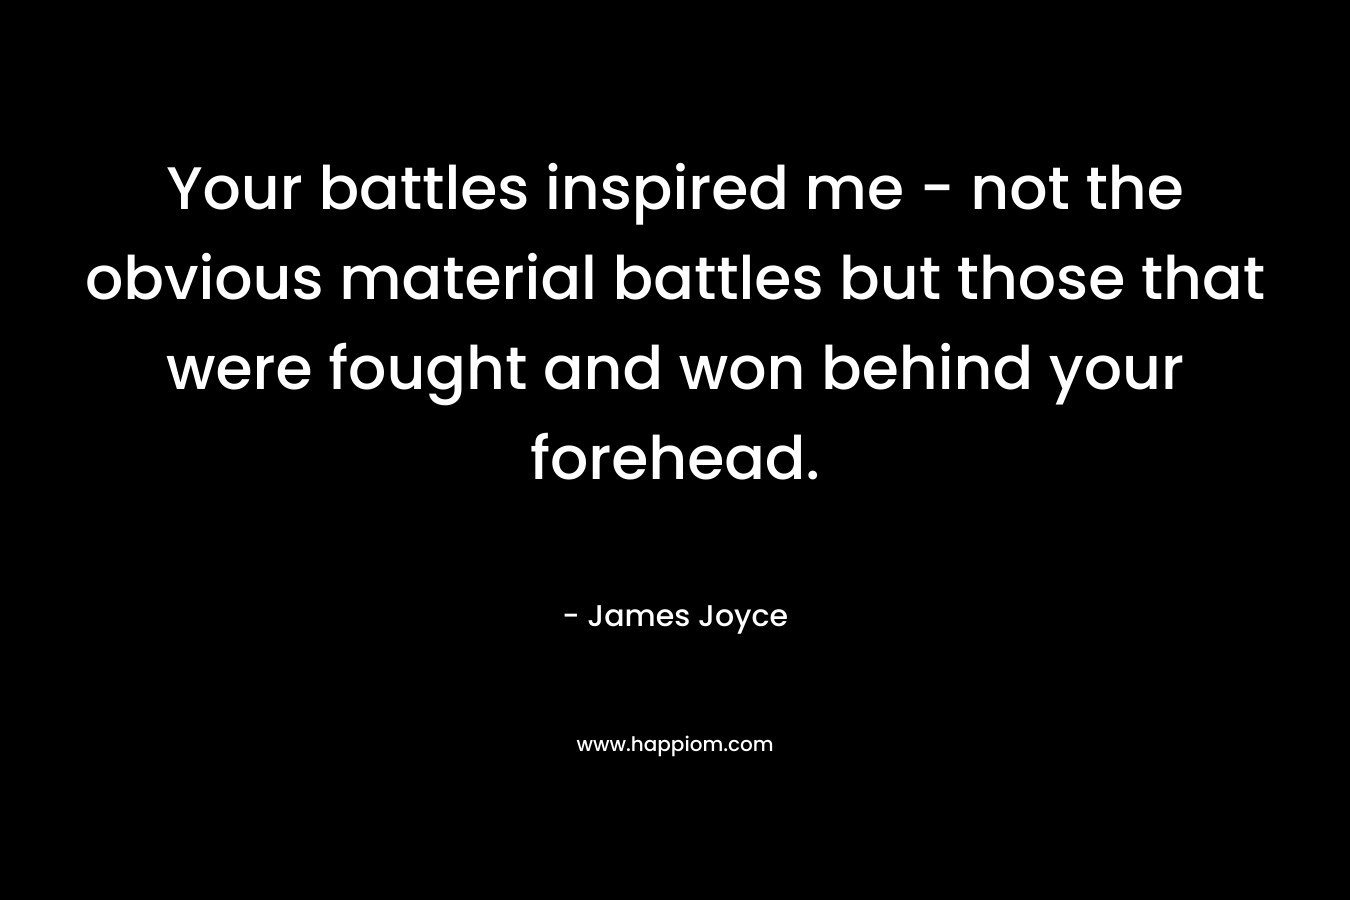 Your battles inspired me - not the obvious material battles but those that were fought and won behind your forehead.